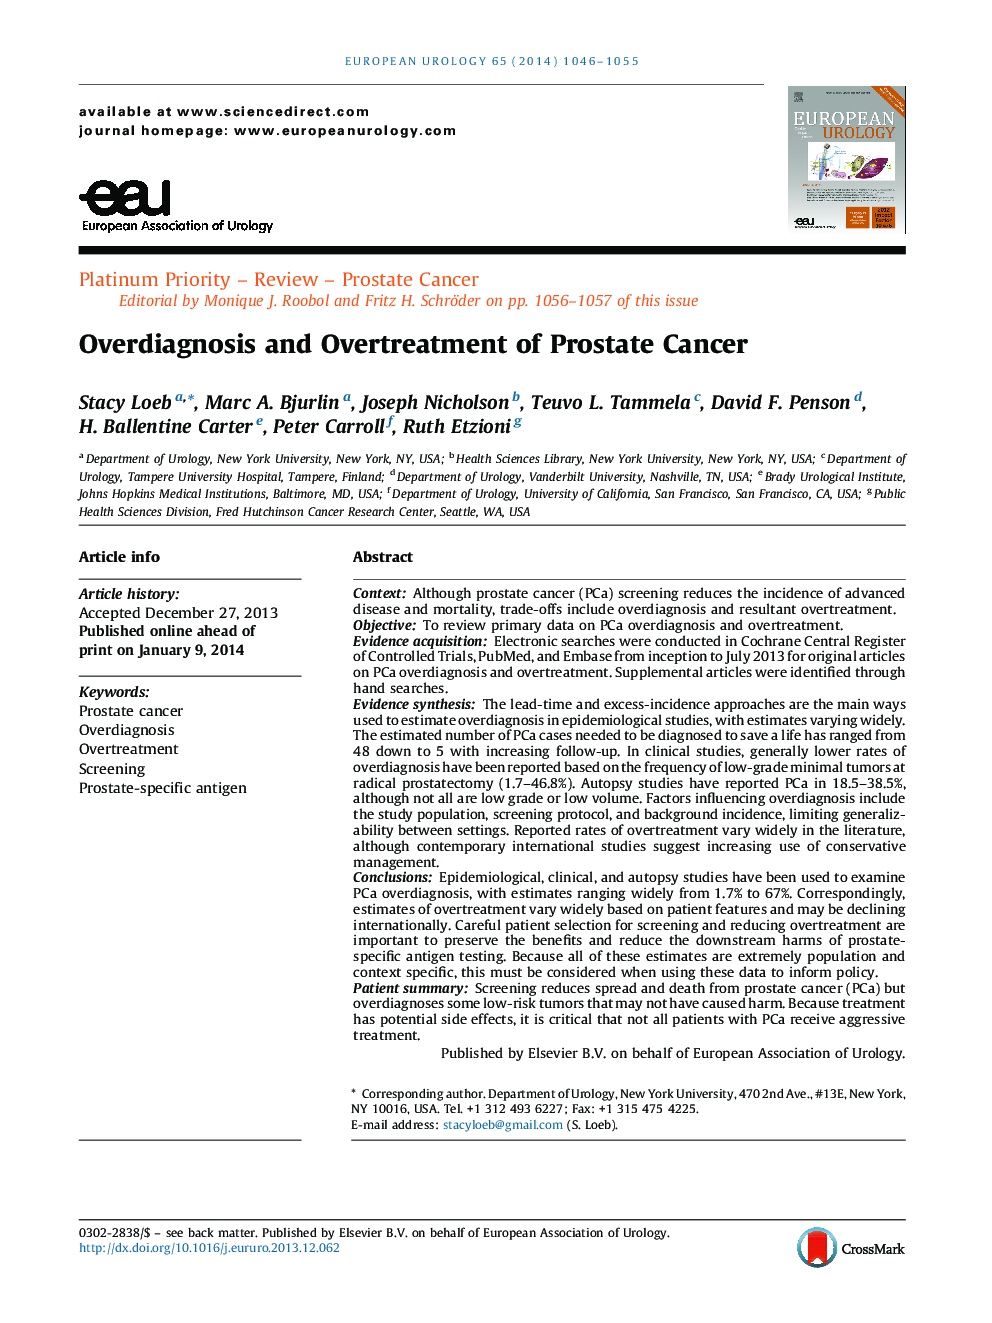 Overdiagnosis and Overtreatment of Prostate Cancer